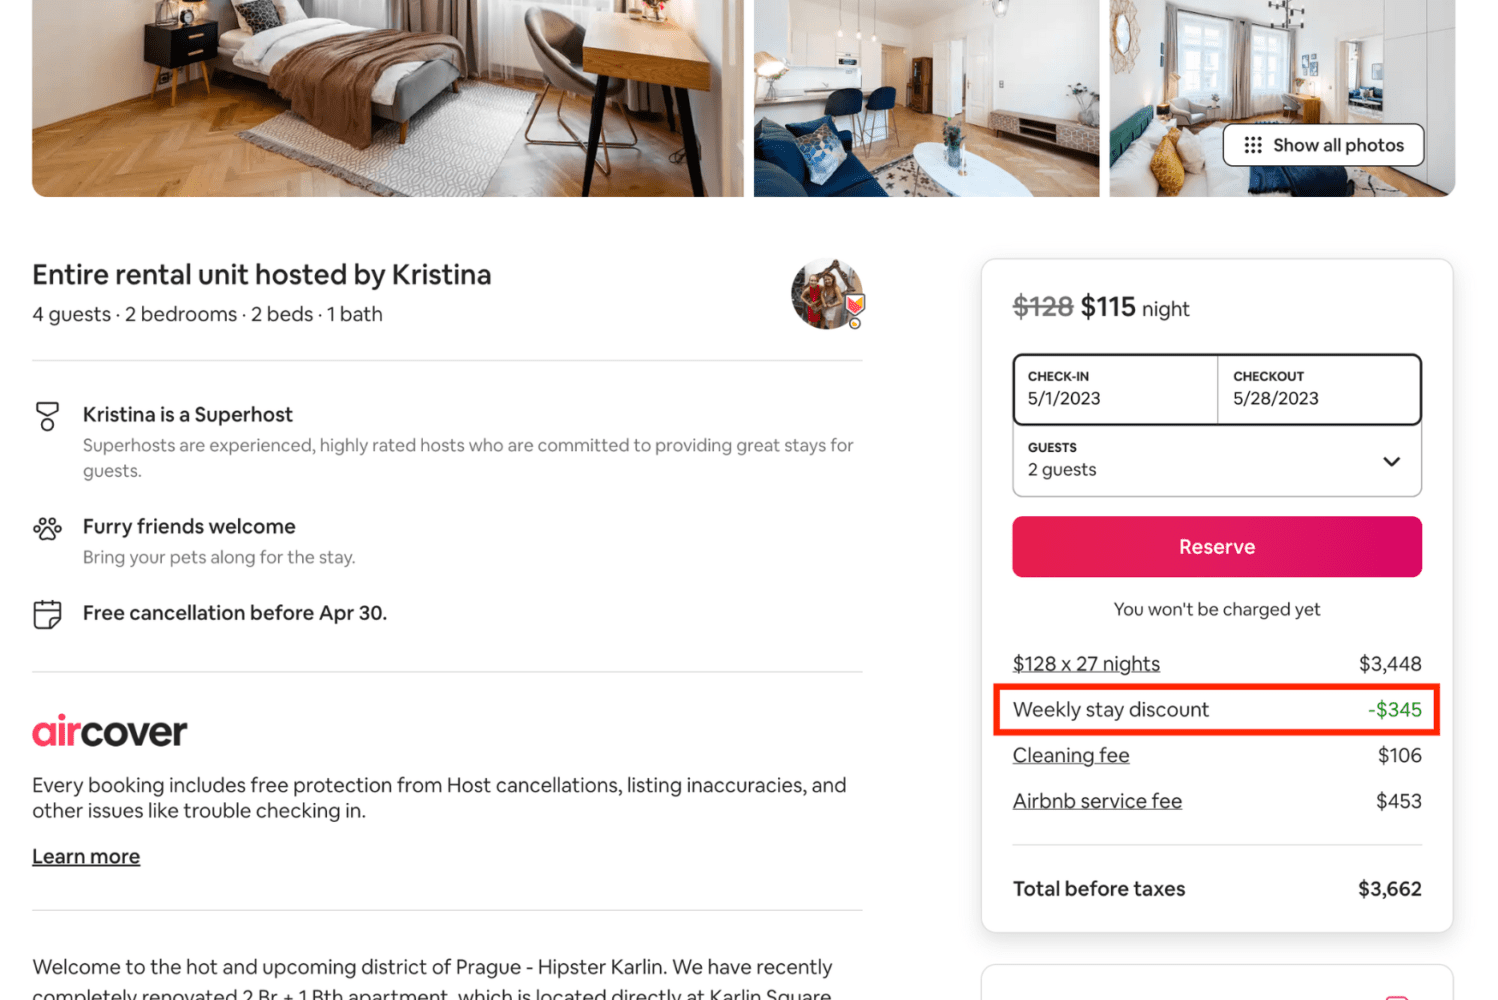 Example 2: How to take advantage of Airbnb discounts